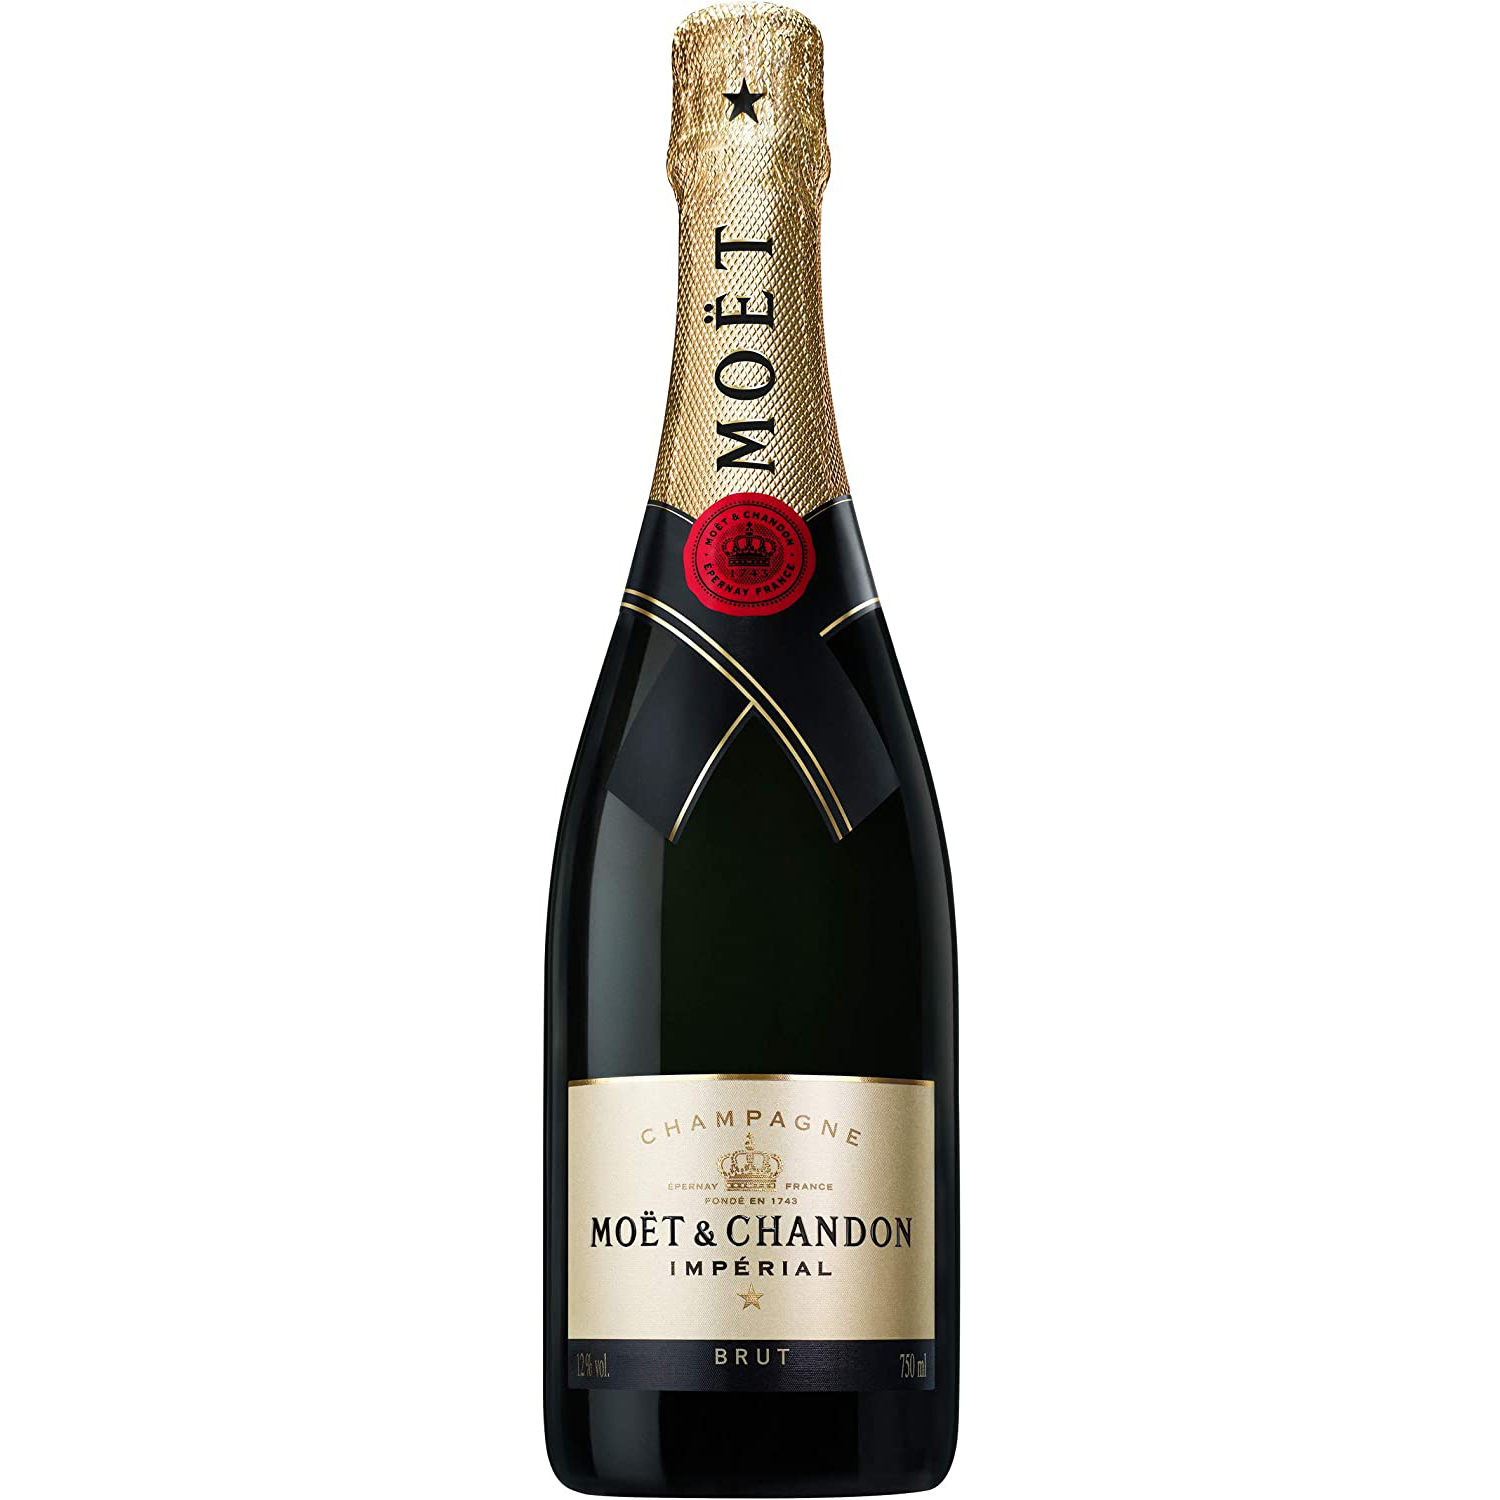 Buy Moet And Chandon Brut Imperial Champagne Bottle - In Moet Gift Box